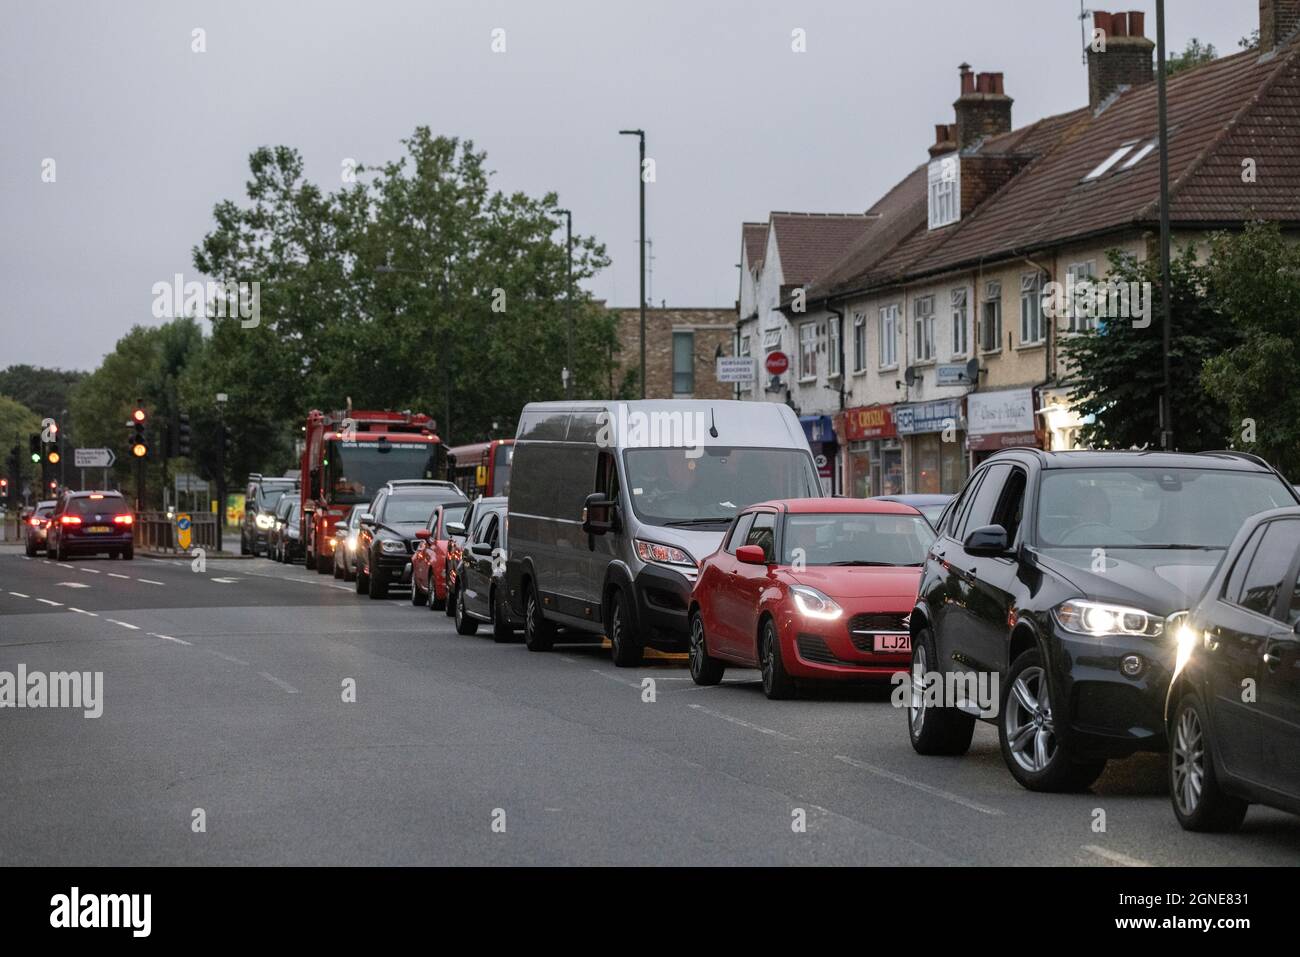 London, UK. 25th Sep, 2021. Queues and empty Petrol Station forecourt in Southwest London as a lack of HGV drivers is delaying the refueling of petrol forecourts and prompting fuel rationing.25th September, Kingston Road, Southwest London, England, UK Credit: Clickpics/Alamy Live News Stock Photo